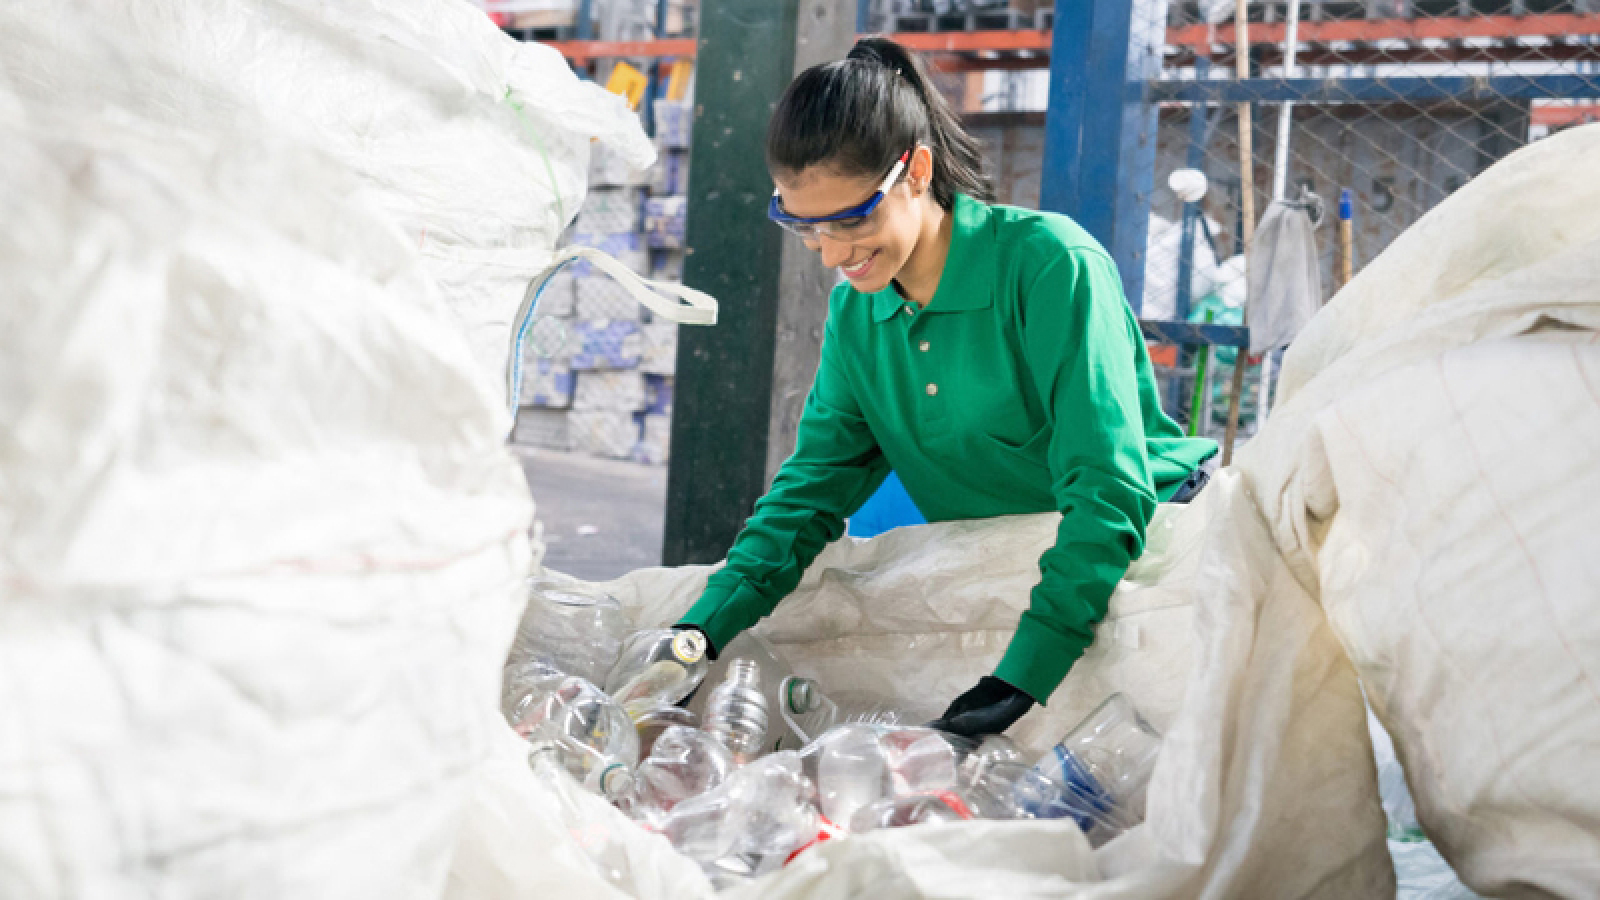 Woman from Wanless sorting through recycling